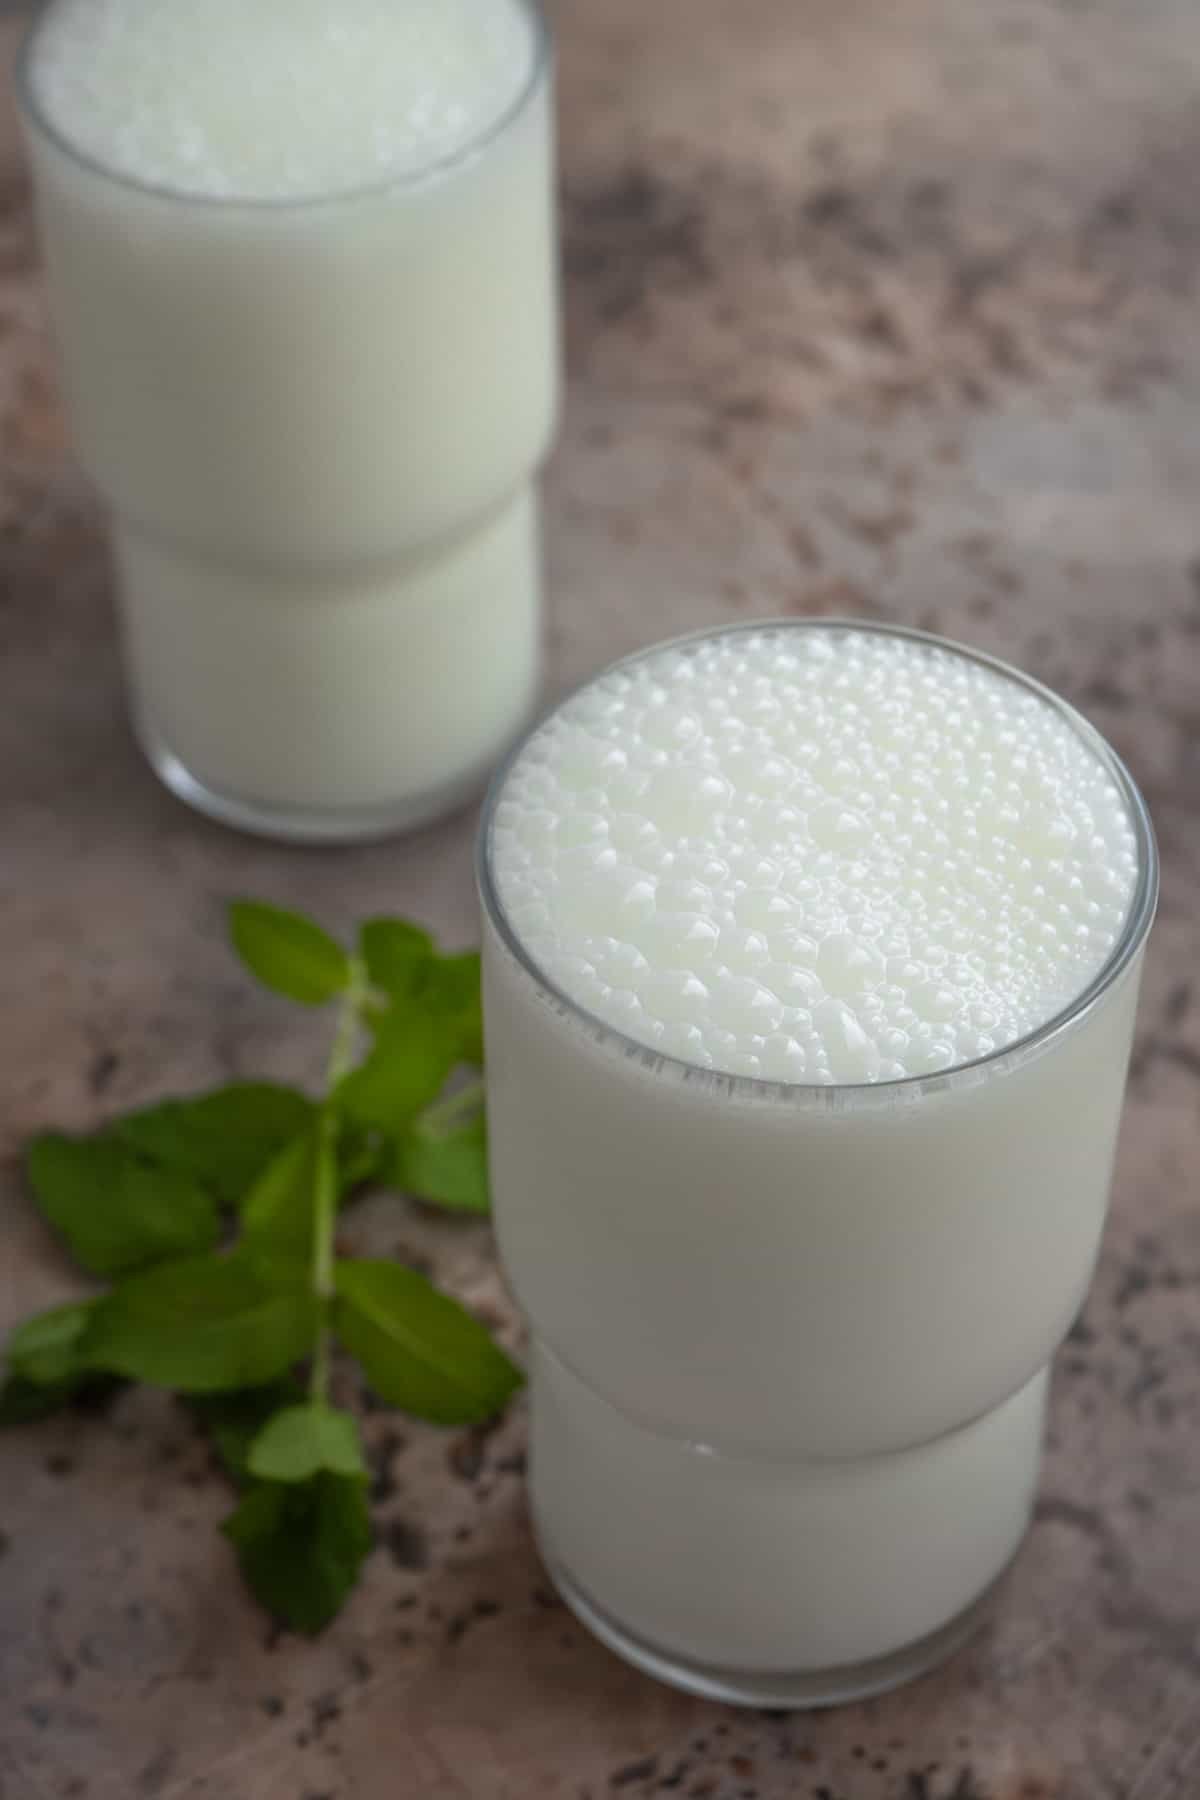 two ayran turkish yogurt drinks in glasses next to a sprig of mint.